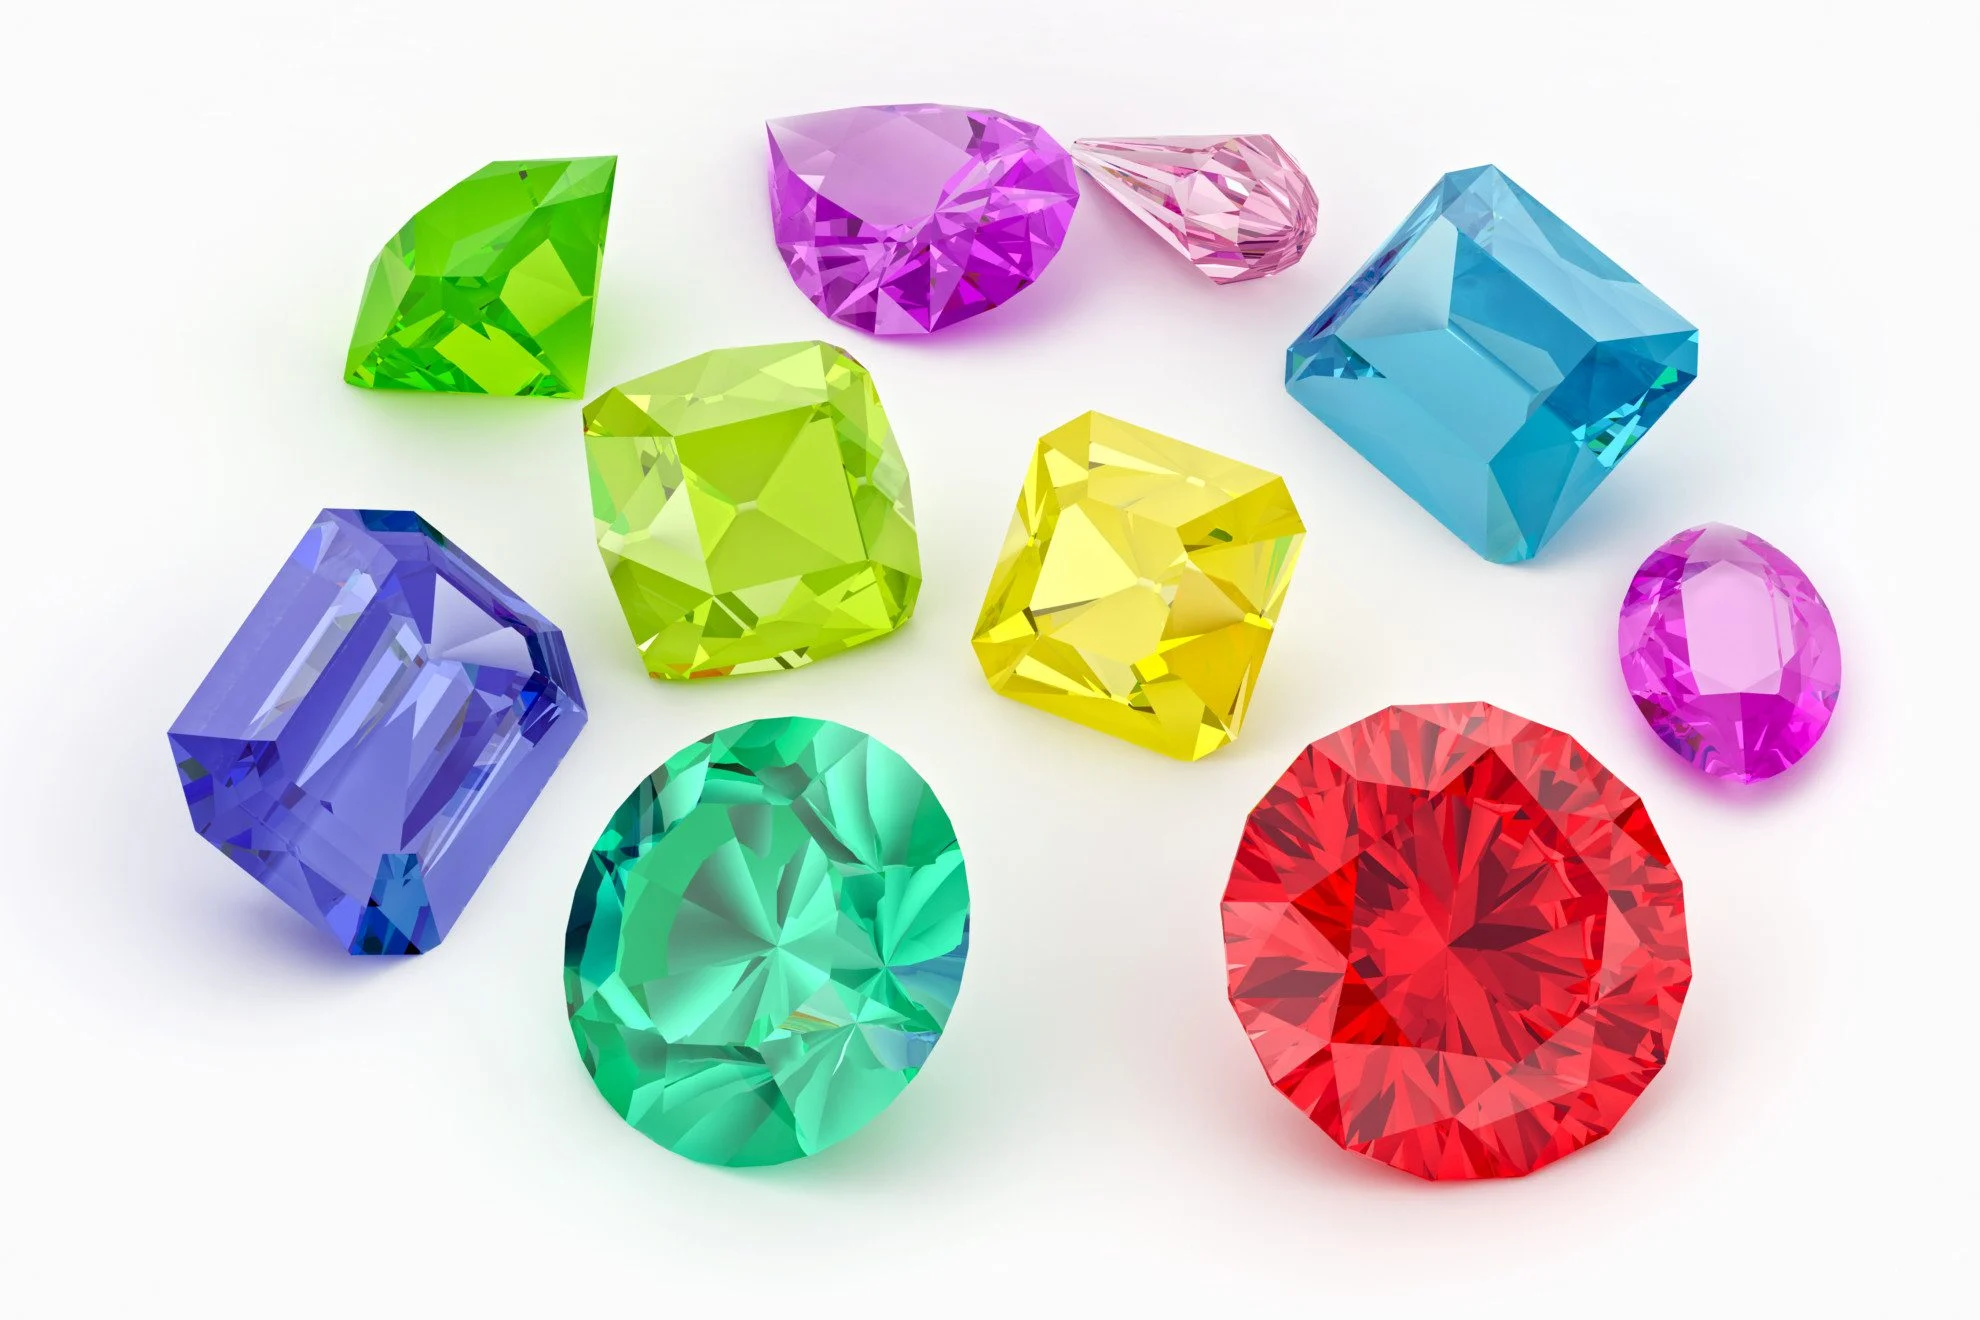 Wholesale Crystals and Gems Suppliers: A Comprehensive Guide